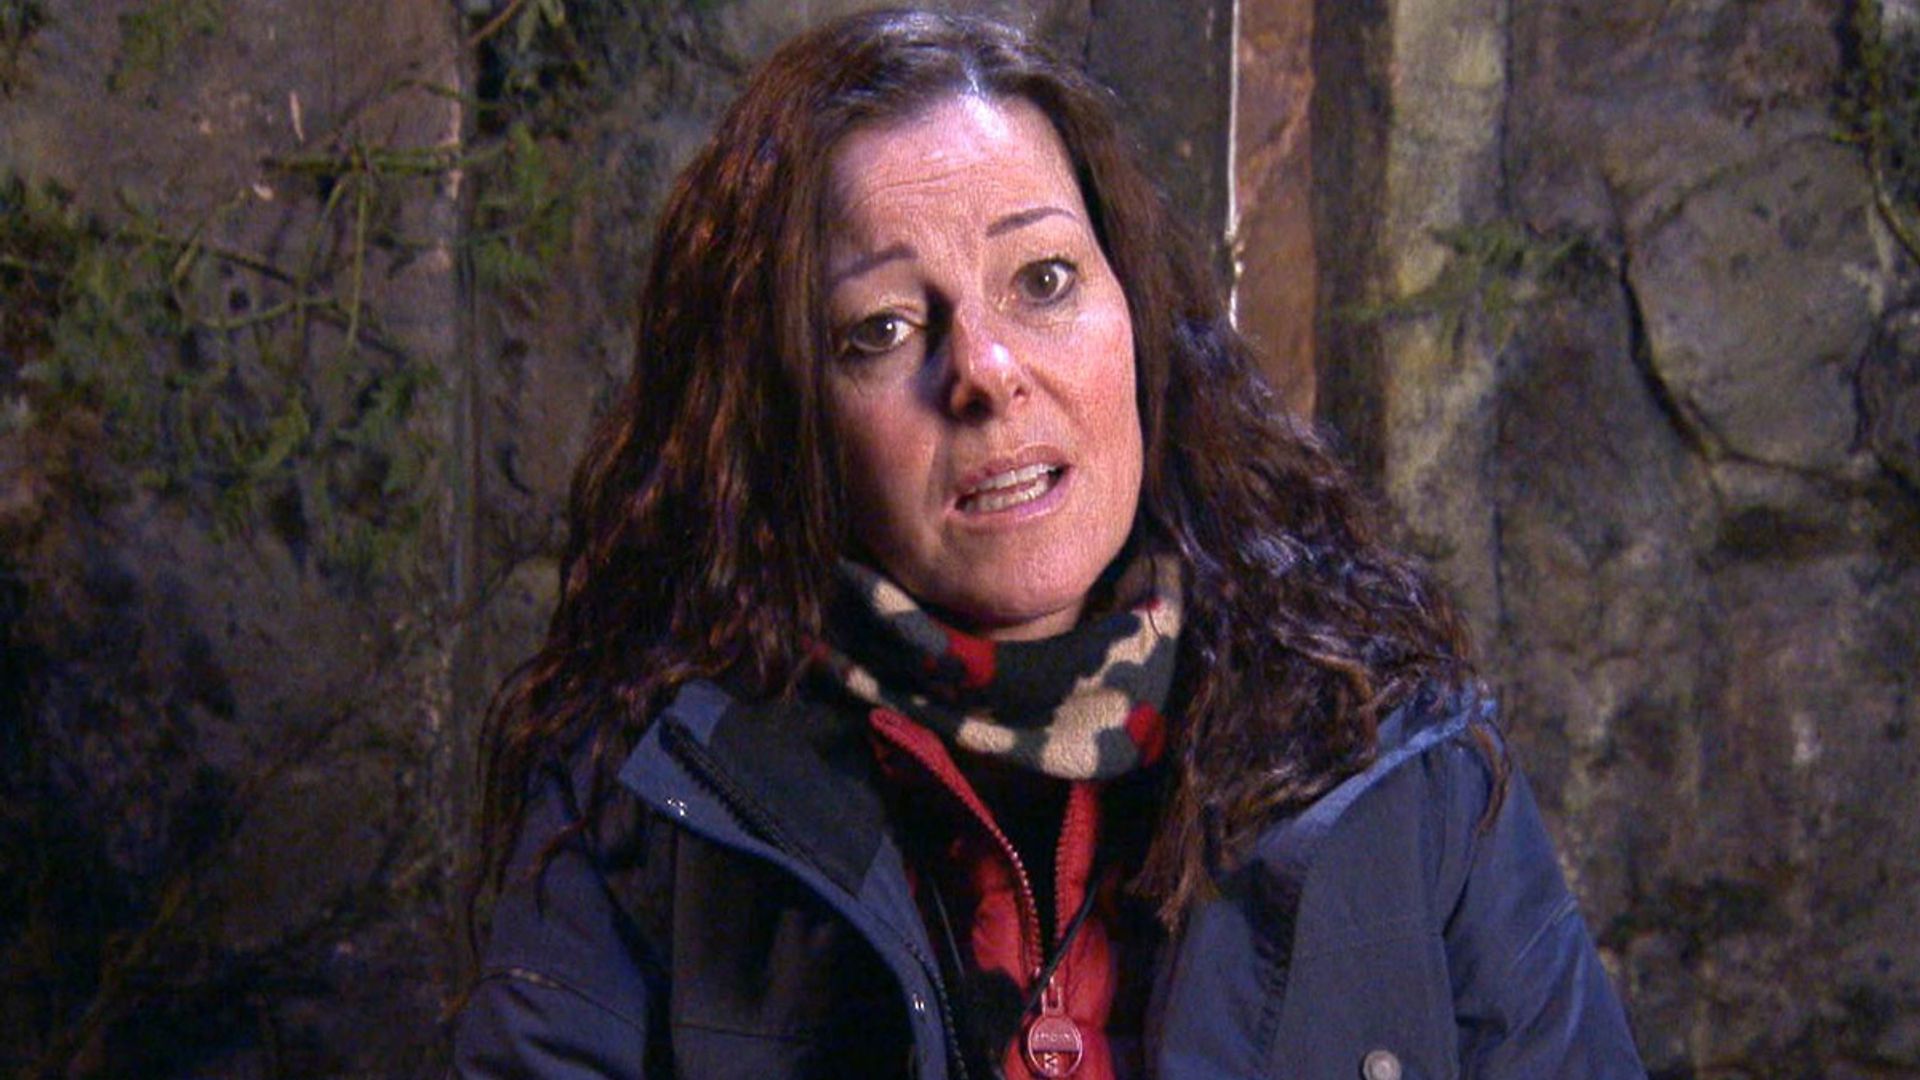 I'm a Celebrity's Ruthie Henshall apologises for Prince Edward relationship comments